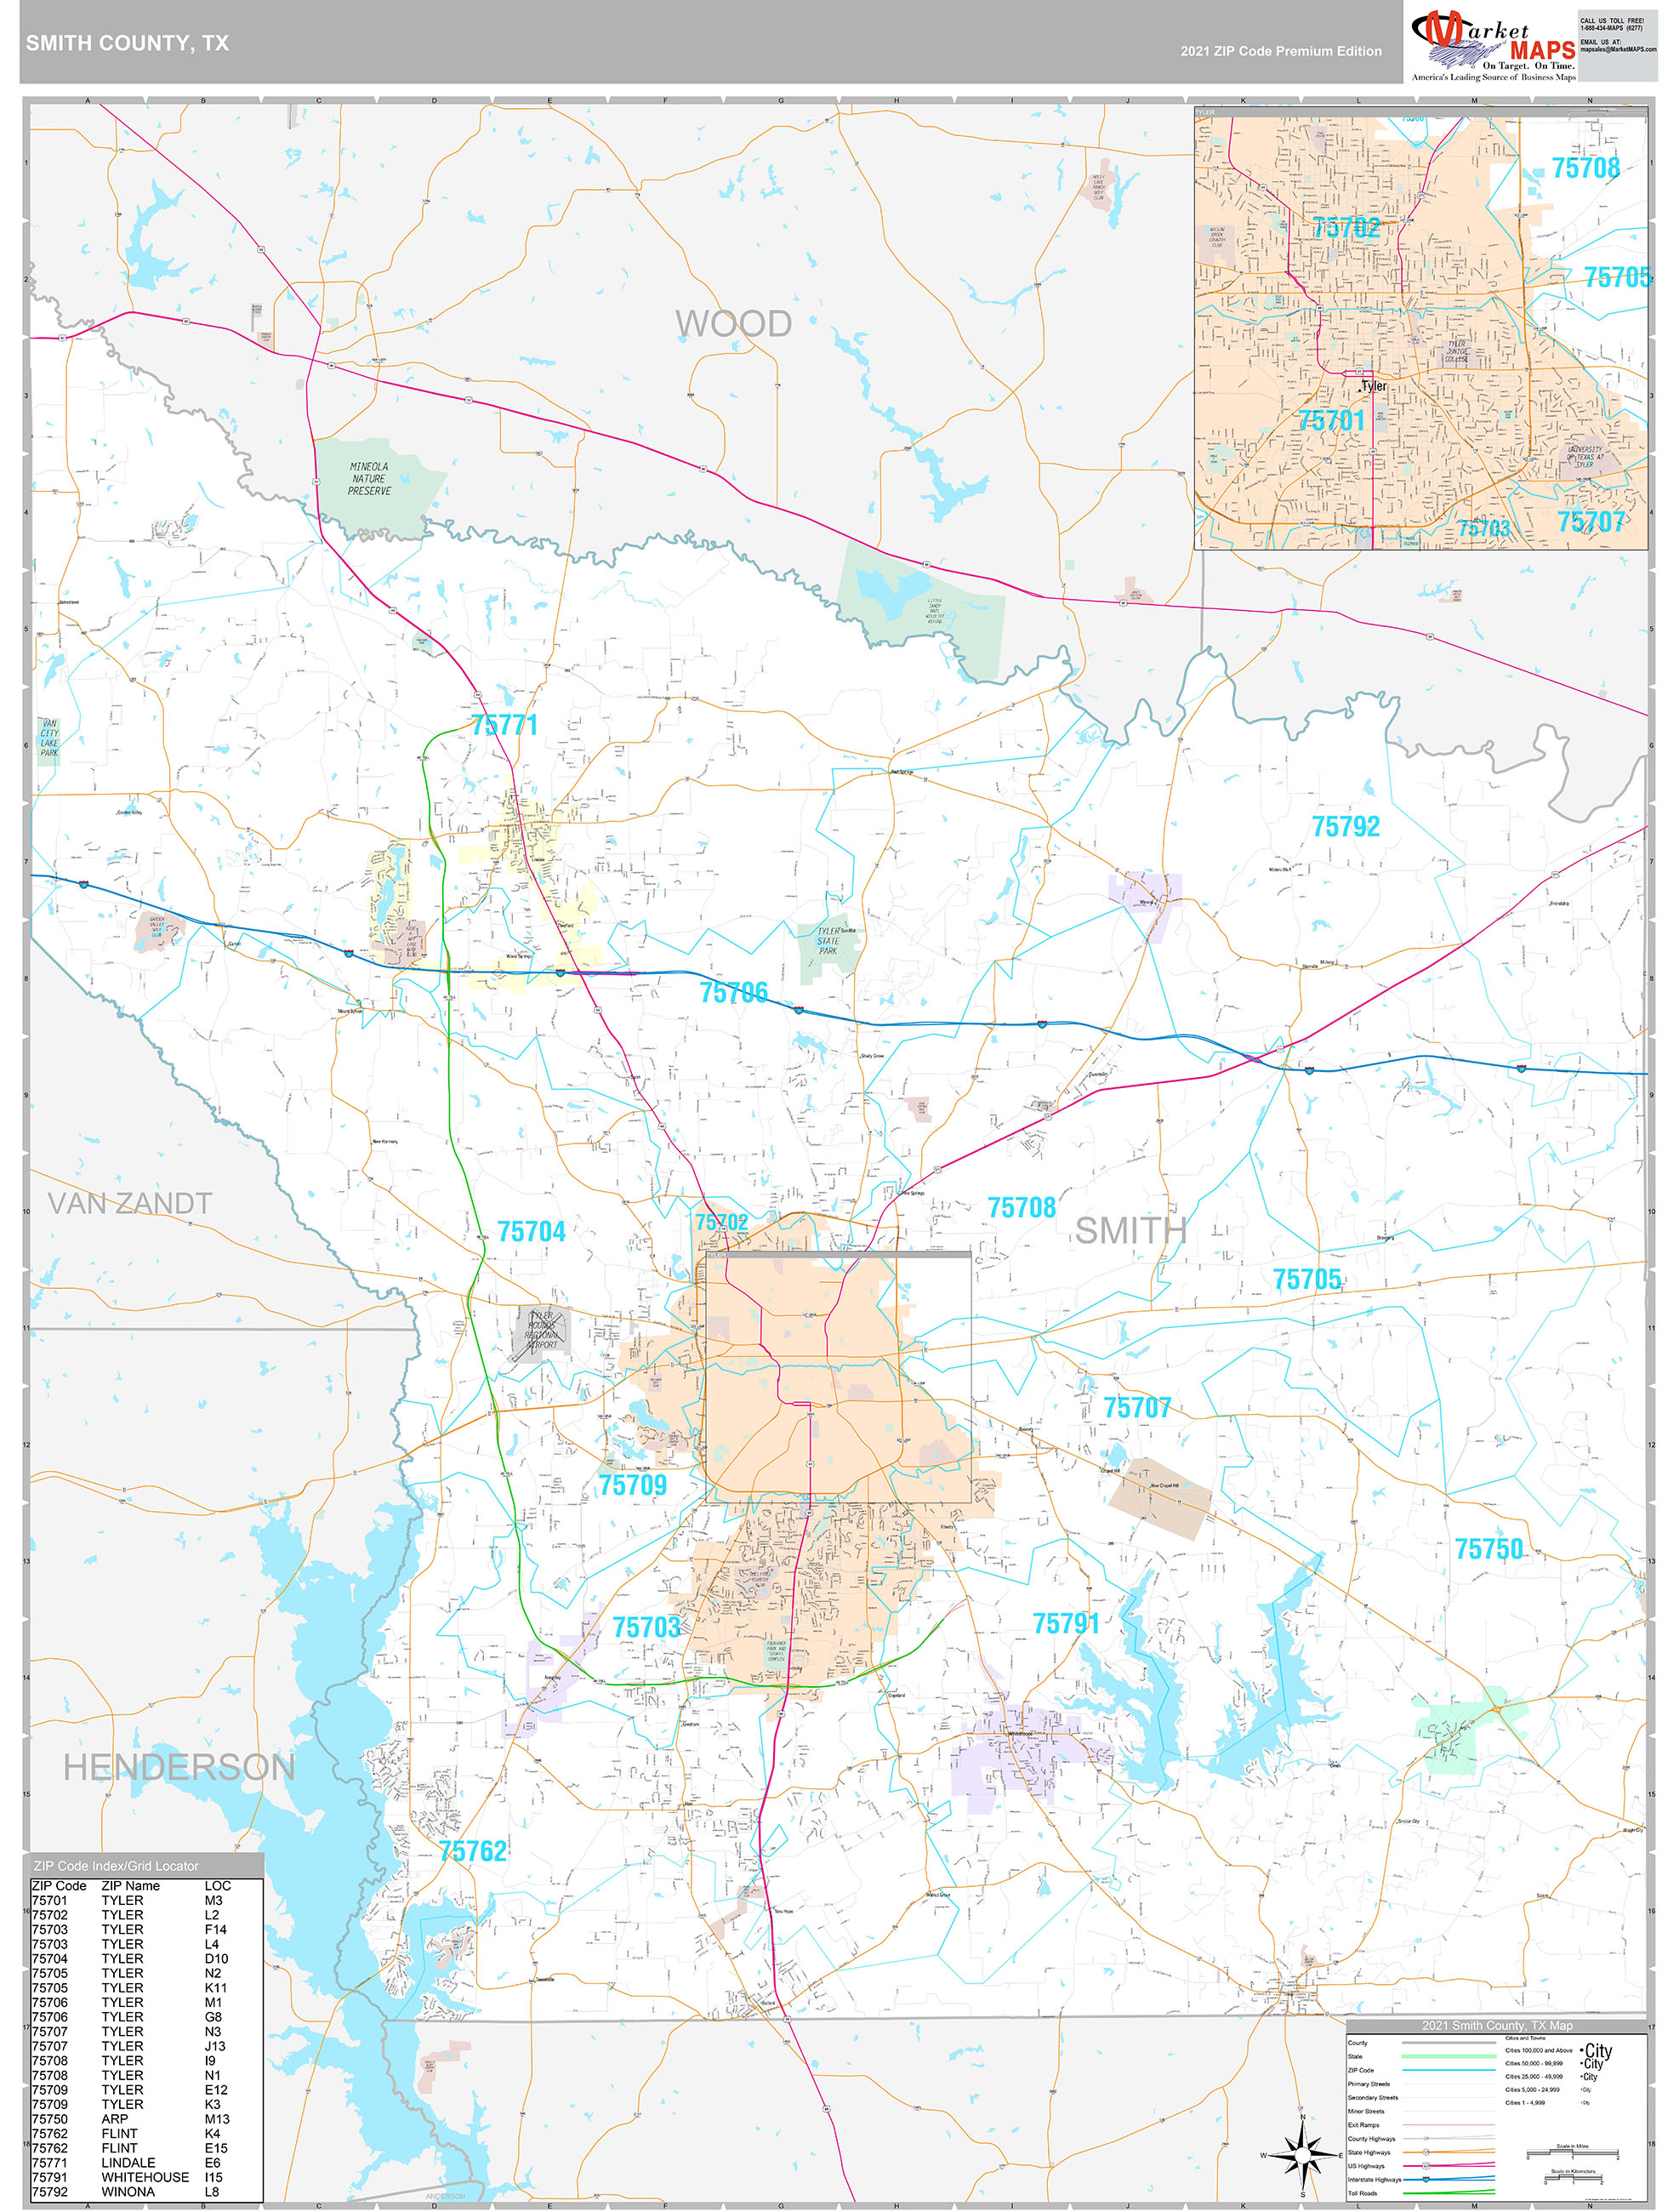 Smith County, TX Wall Map Premium Style by MarketMAPS - MapSales